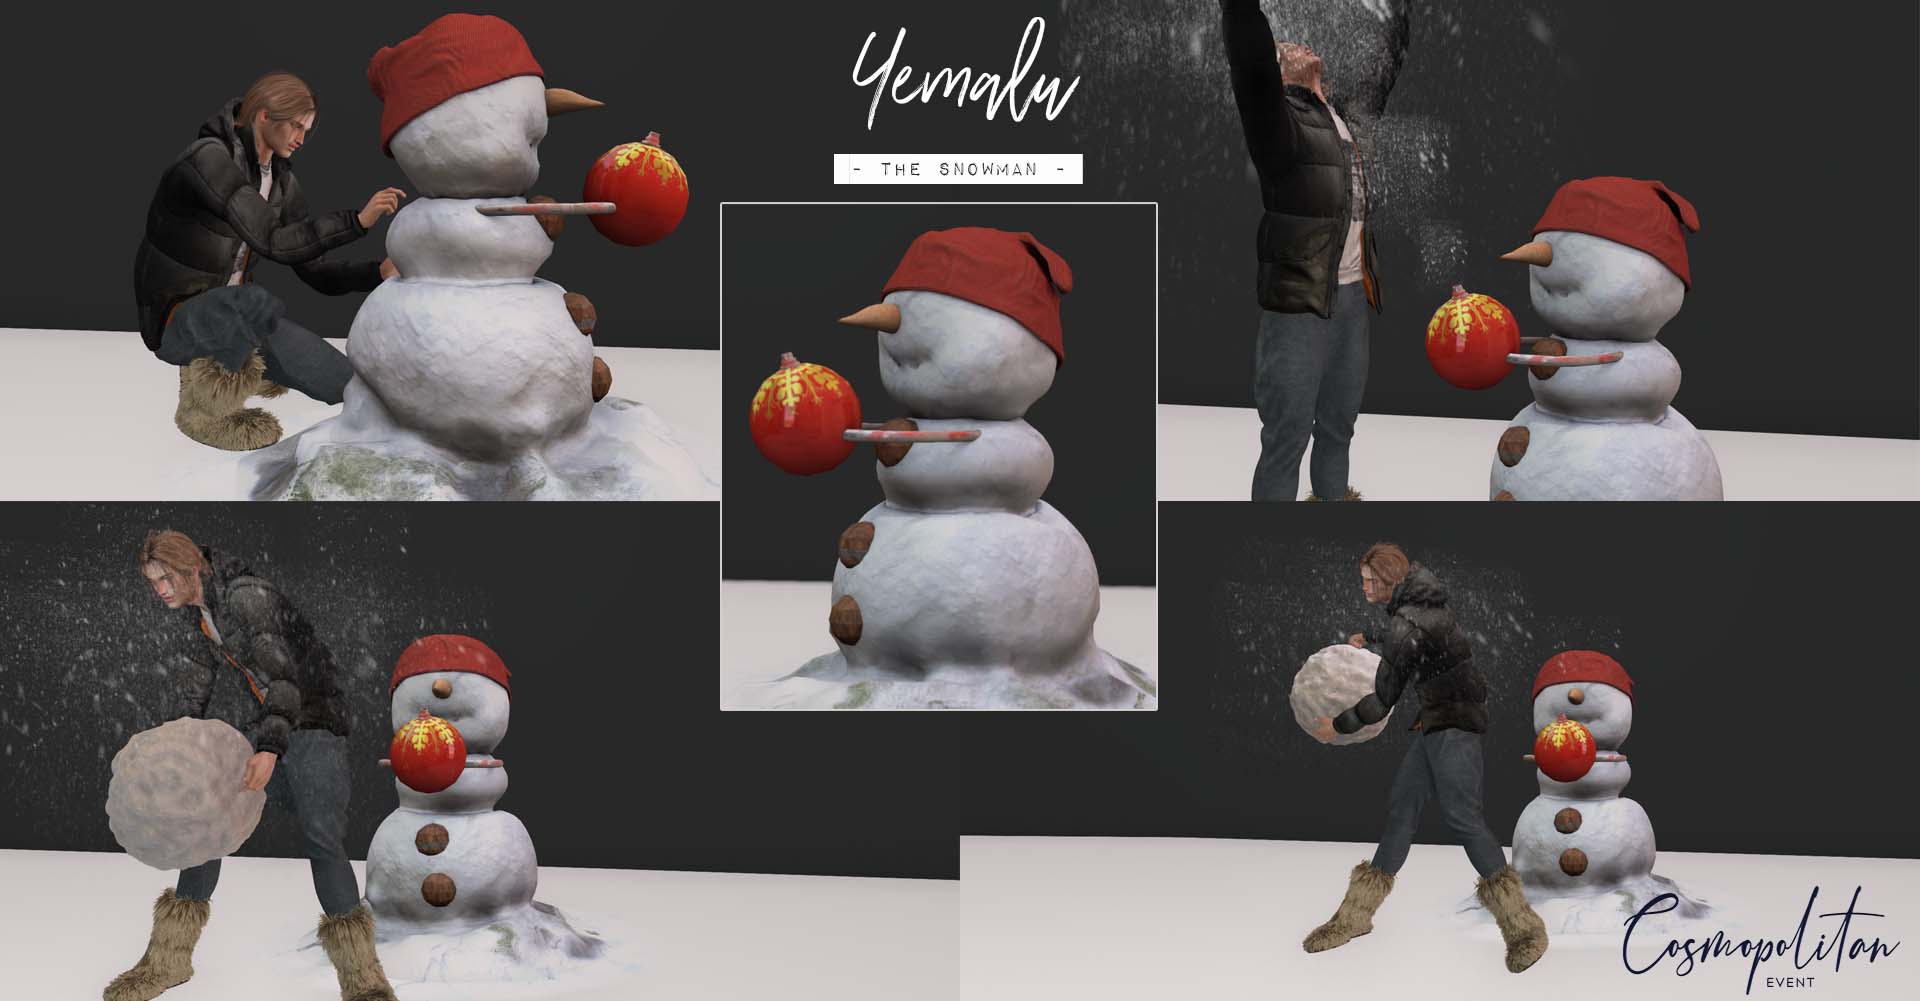 Sources – Yemalu the Snowman